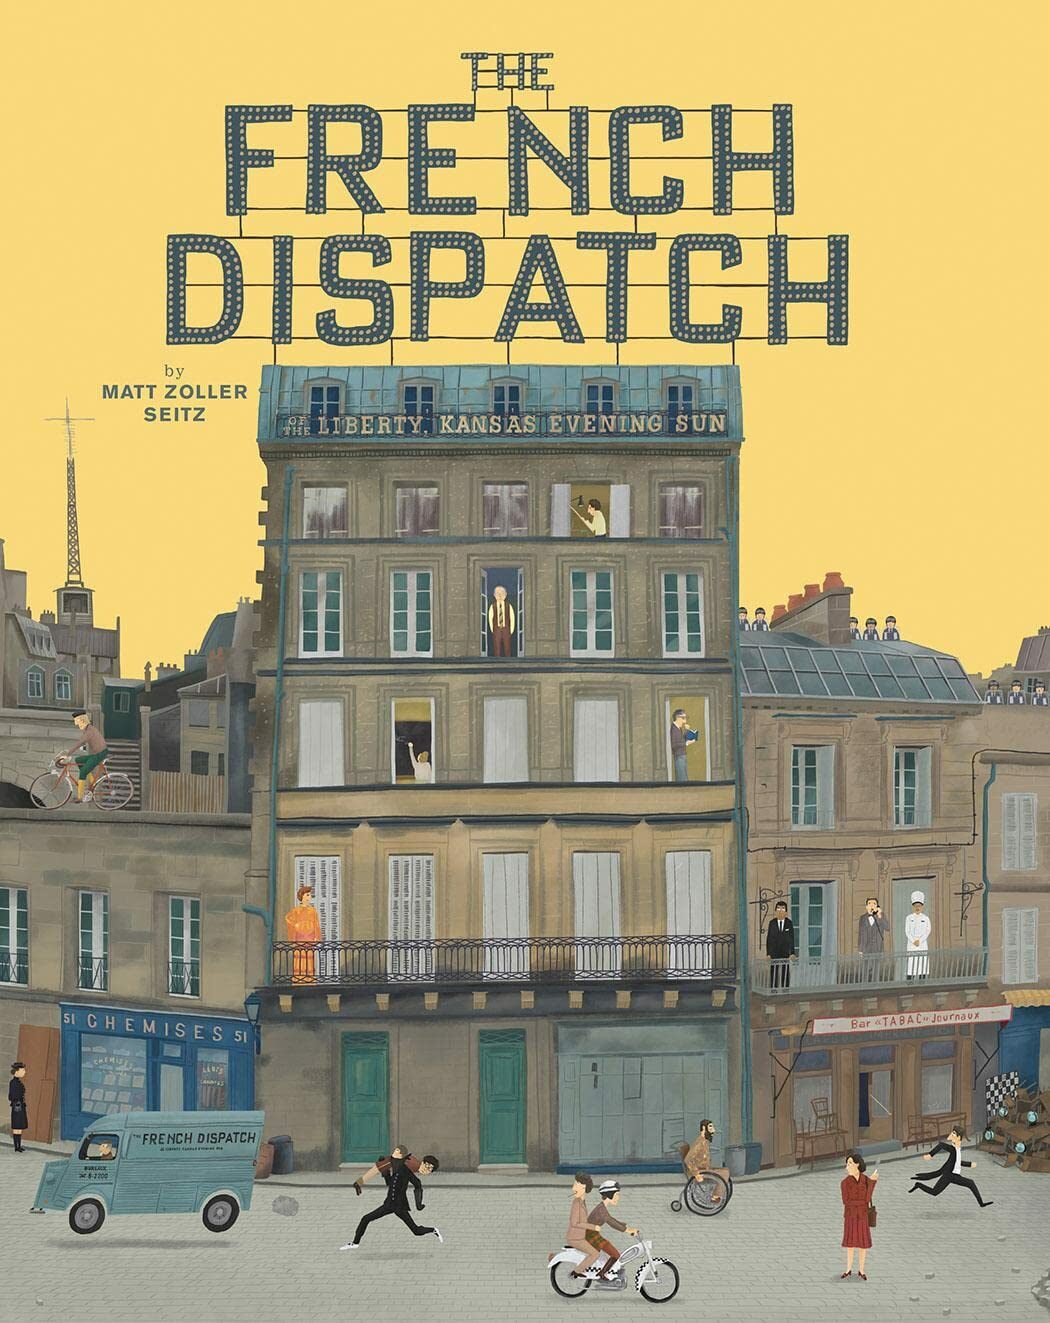 The Wes Anderson Collection: The French Dispatch (The Wes Anderson Collection #5)